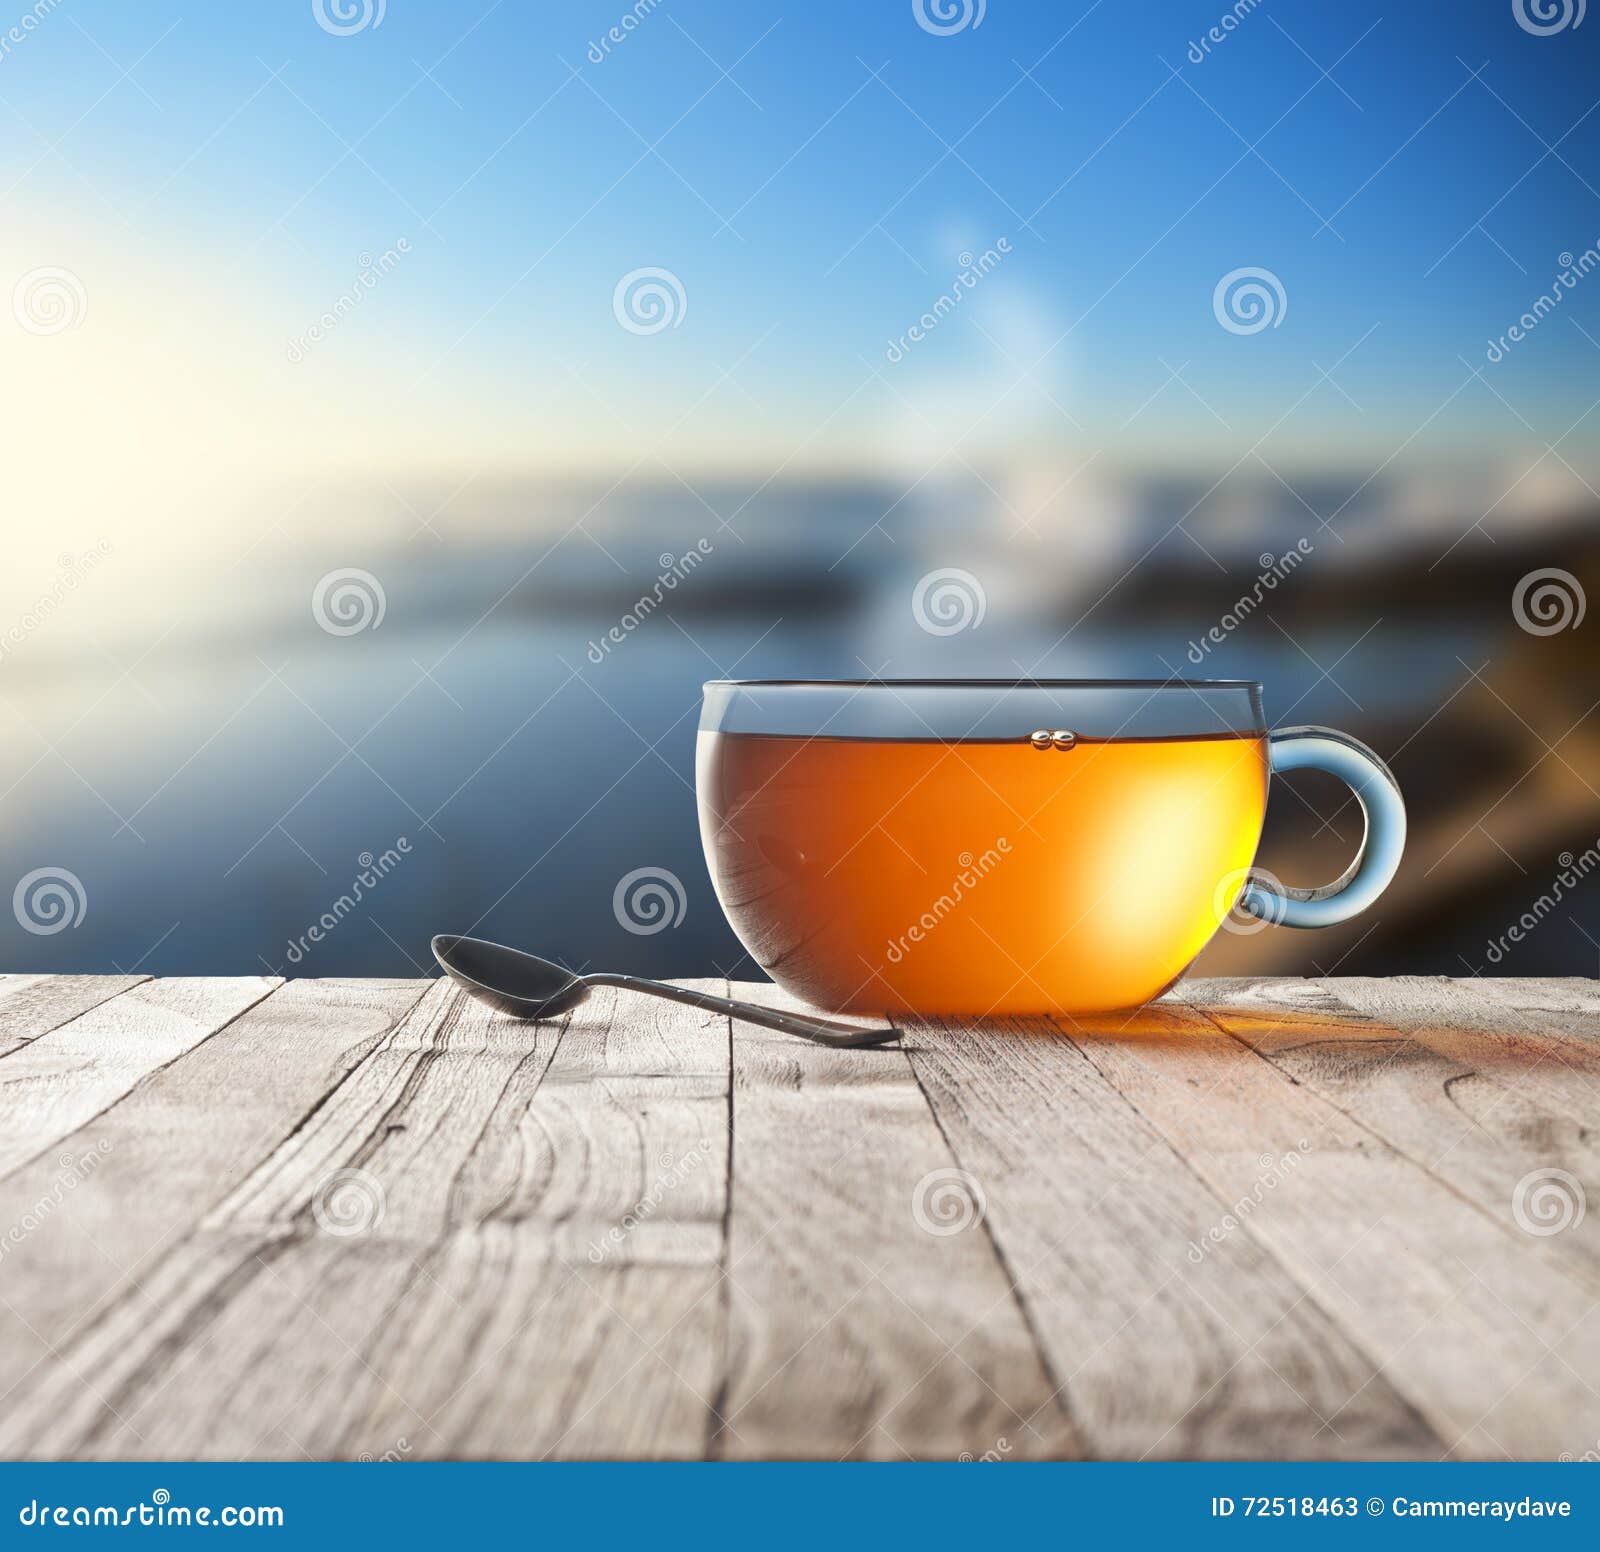 morning tea time cup sky background